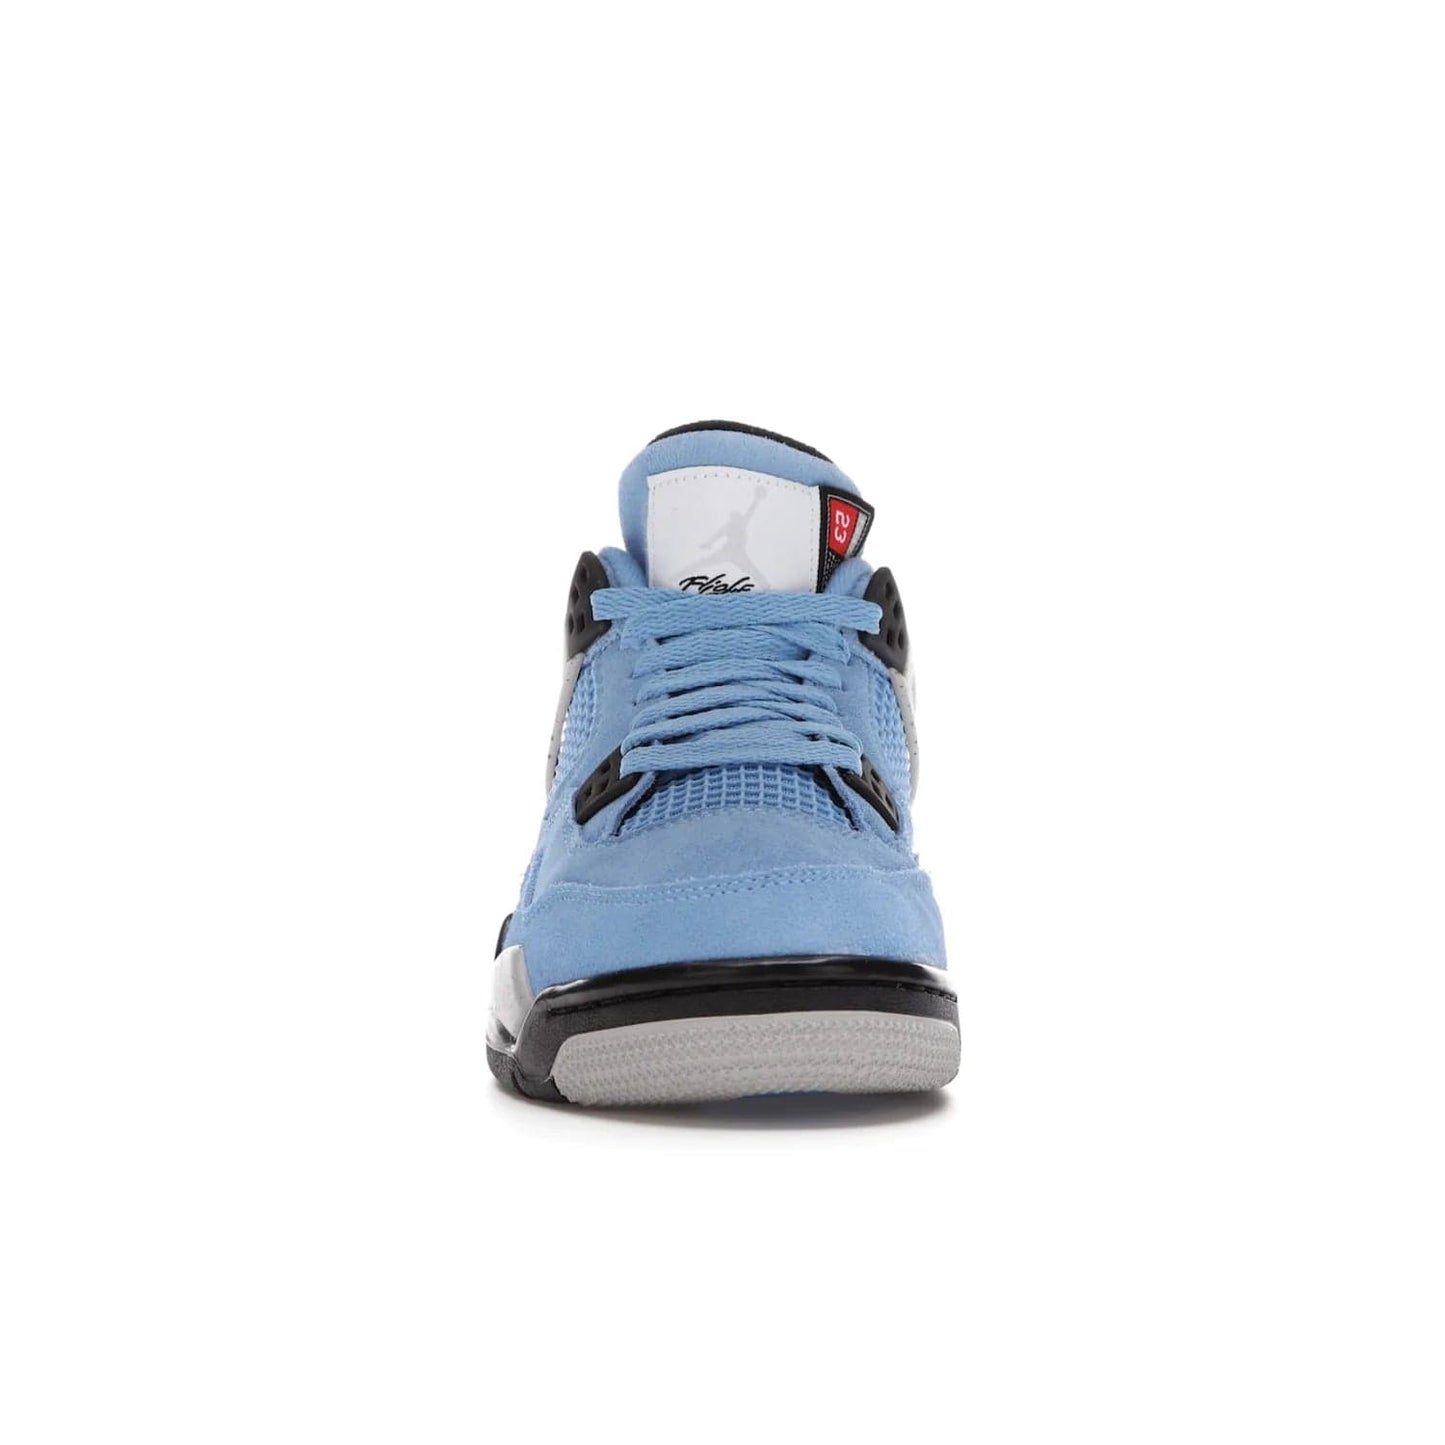 Jordan 4 Retro University Blue (GS) - Image 10 - Only at www.BallersClubKickz.com - Air Jordan 4 Retro University Blue GS: Classic silhouette and vibrant colors. Featuring a suede upper and Jumpman icon, this grade school-size shoe is perfect for collections and retails at $150.